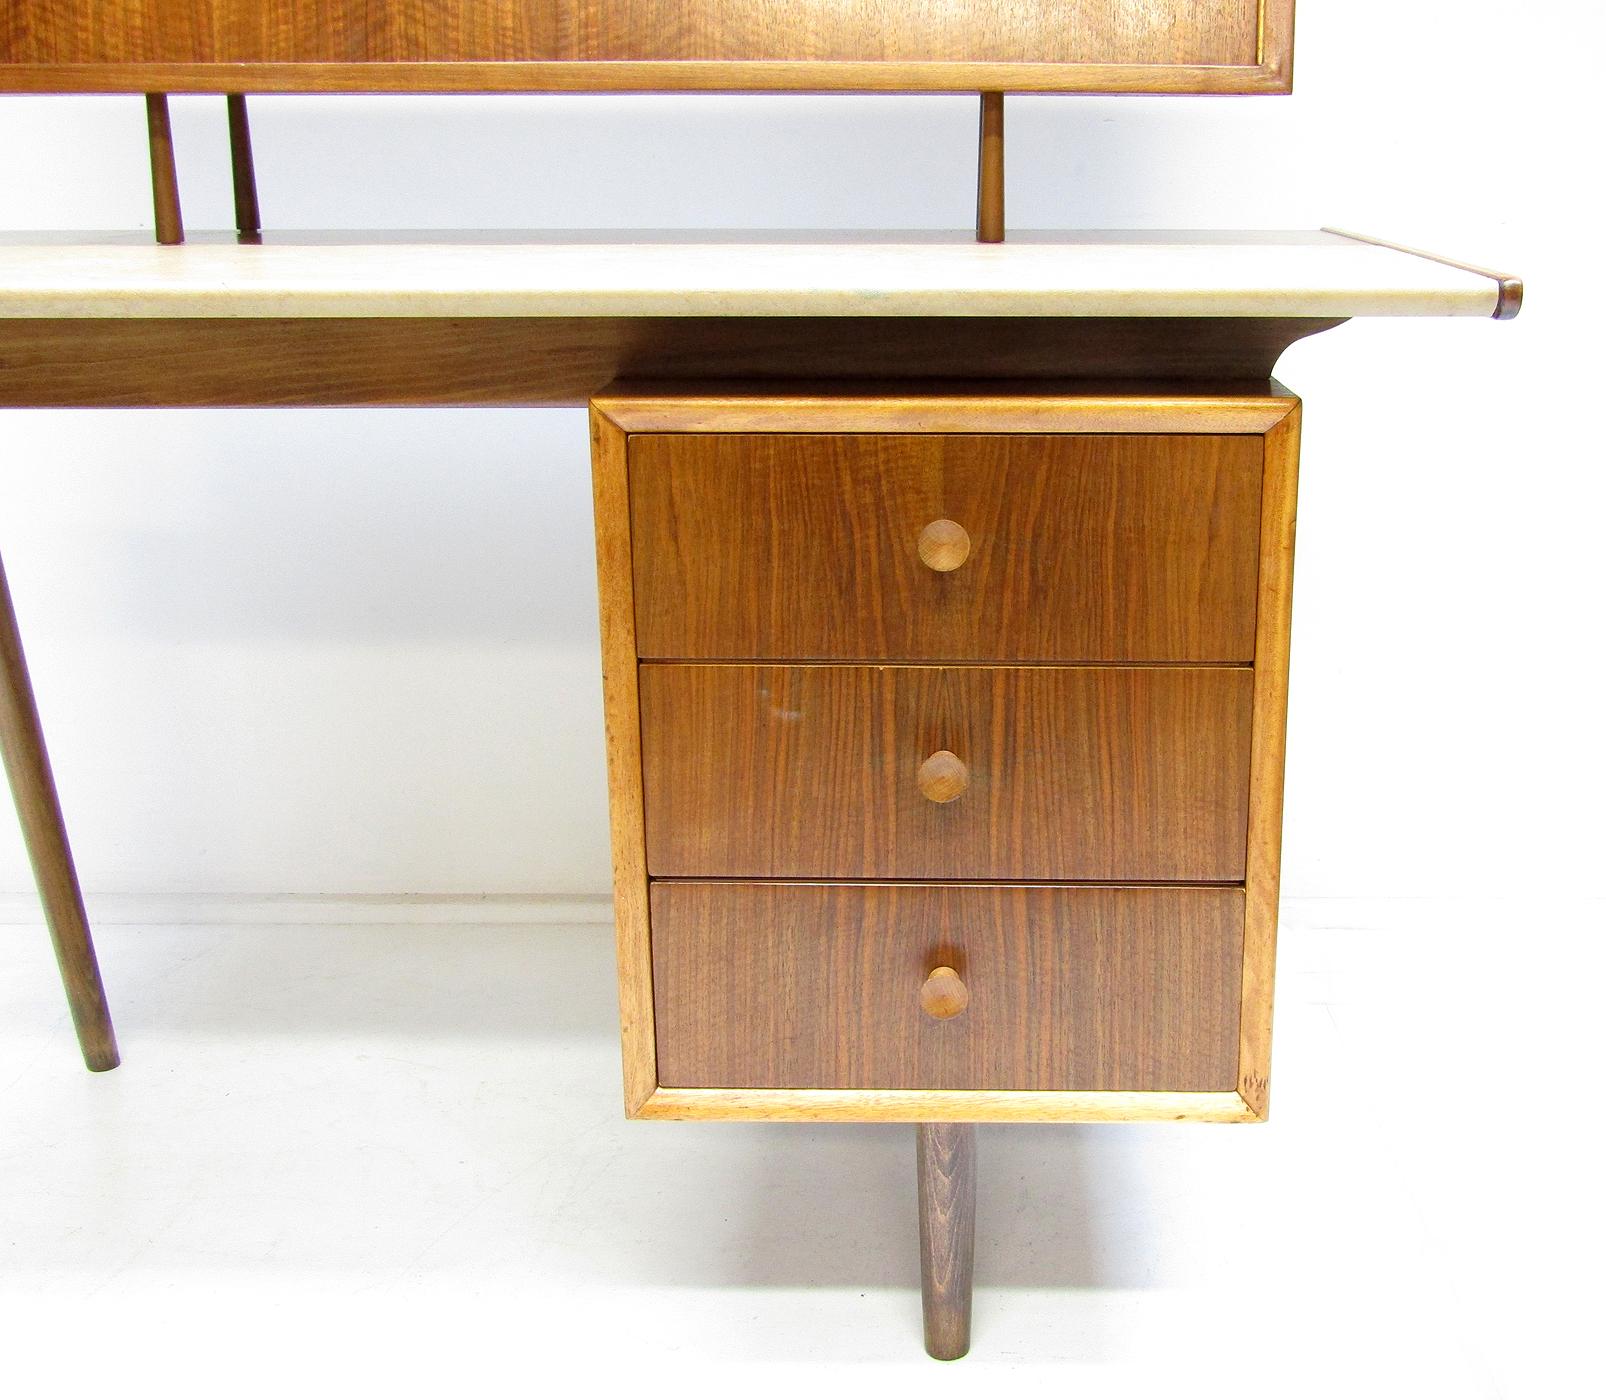 1950s Vintage Atomic Desk in Walnut with Floating Cabinet & Lamp 2